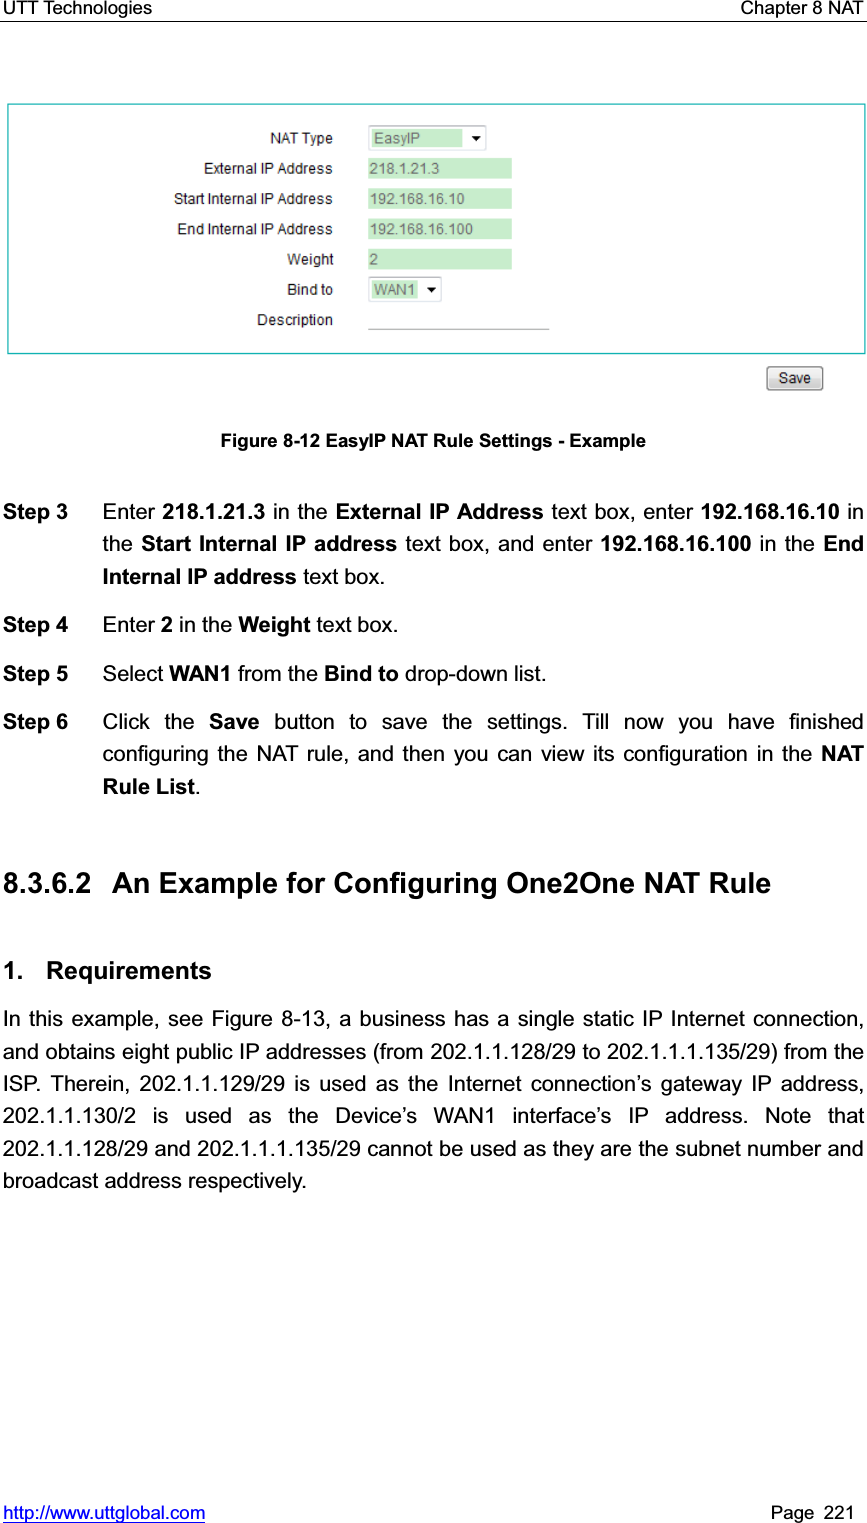 UTT Technologies    Chapter 8 NAT   http://www.uttglobal.com Page 221 Figure 8-12 EasyIP NAT Rule Settings - Example Step 3  Enter 218.1.21.3 in the External IP Address text box, enter 192.168.16.10 in the Start Internal IP address text box, and enter 192.168.16.100 in the End Internal IP address text box. Step 4  Enter 2 in the Weight text box. Step 5  Select WAN1 from the Bind to drop-down list. Step 6  Click the Save button to save the settings. Till now you have finished configuring the NAT rule, and then you can view its configuration in the NAT Rule List.8.3.6.2  An Example for Configuring One2One NAT Rule 1. Requirements In this example, see Figure 8-13, a business has a single static IP Internet connection, and obtains eight public IP addresses (from 202.1.1.128/29 to 202.1.1.1.135/29) from the ISP. Therein, 202.1.1.129/29 is used as the Internet connection¶s gateway IP address, 202.1.1.130/2 is used as the Device¶s WAN1 interfacH¶s IP address. Note that 202.1.1.128/29 and 202.1.1.1.135/29 cannot be used as they are the subnet number and broadcast address respectively. 